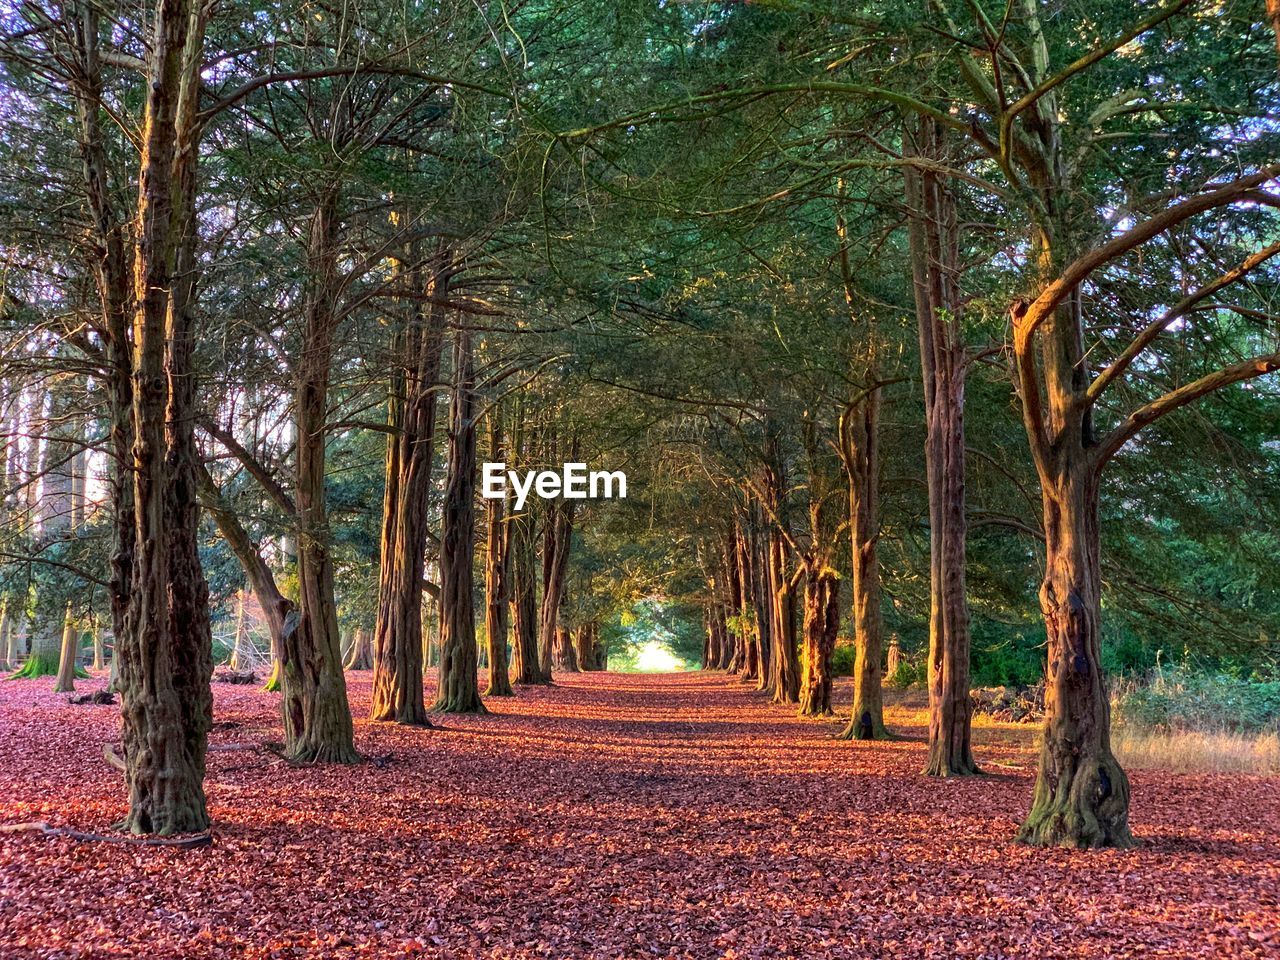 FOOTPATH AMIDST TREES IN AUTUMN